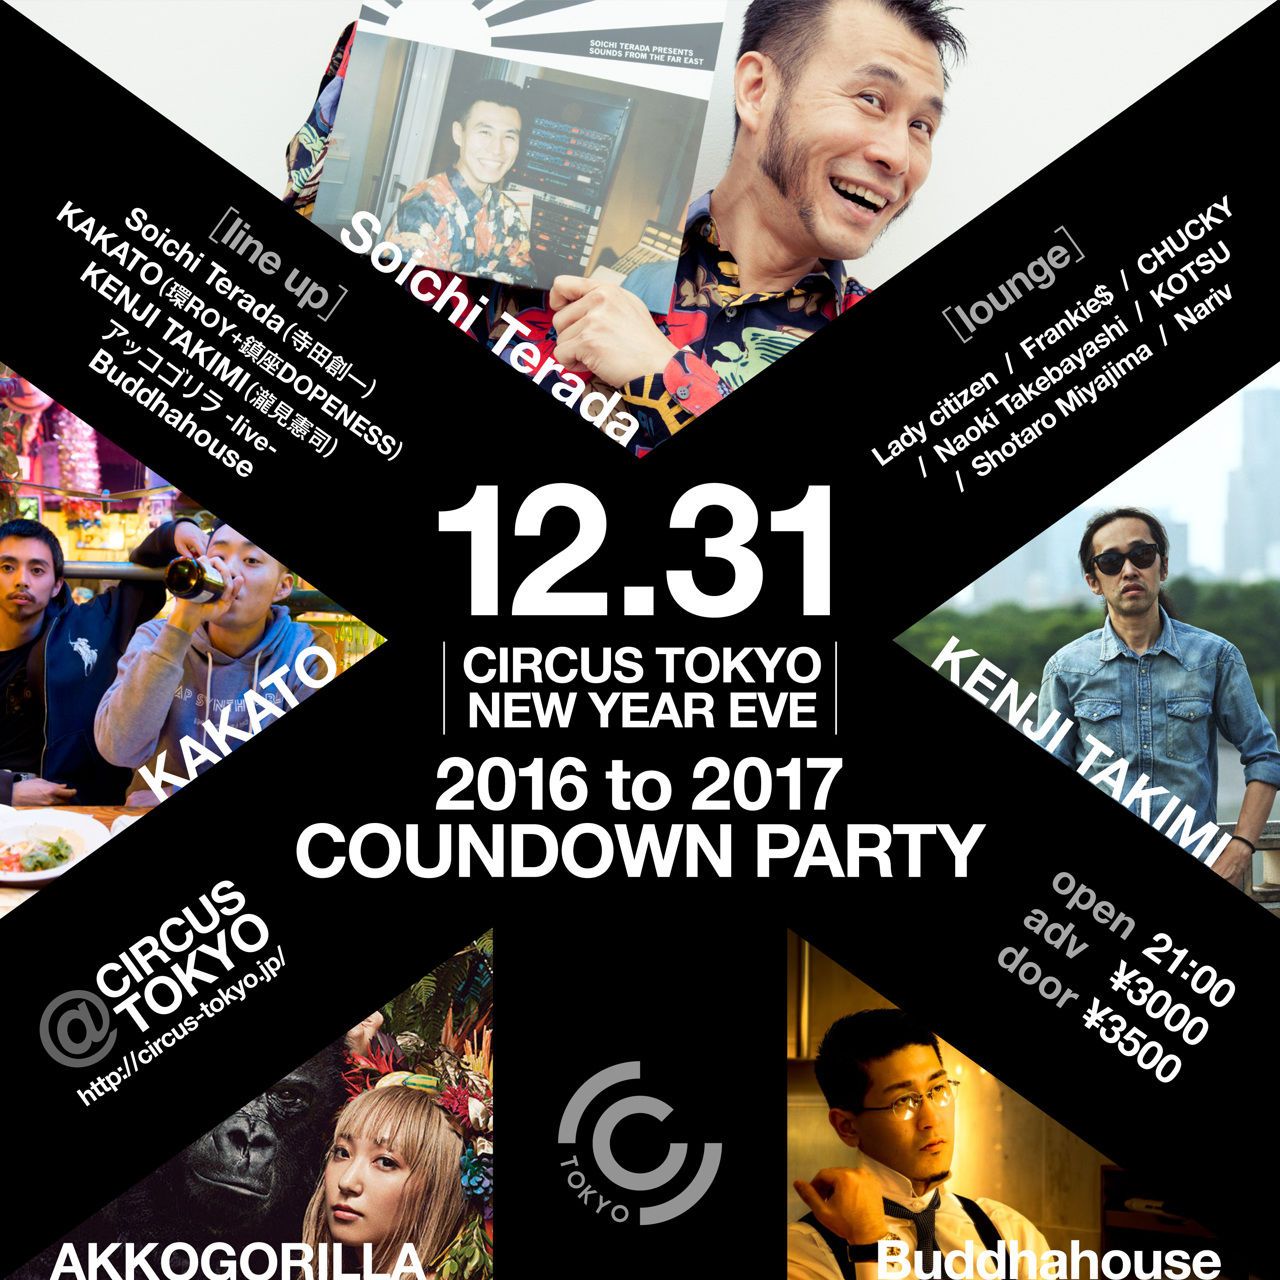 CIRCUS TOKYO COUNTDOWN PARTY 2016 TO 2017